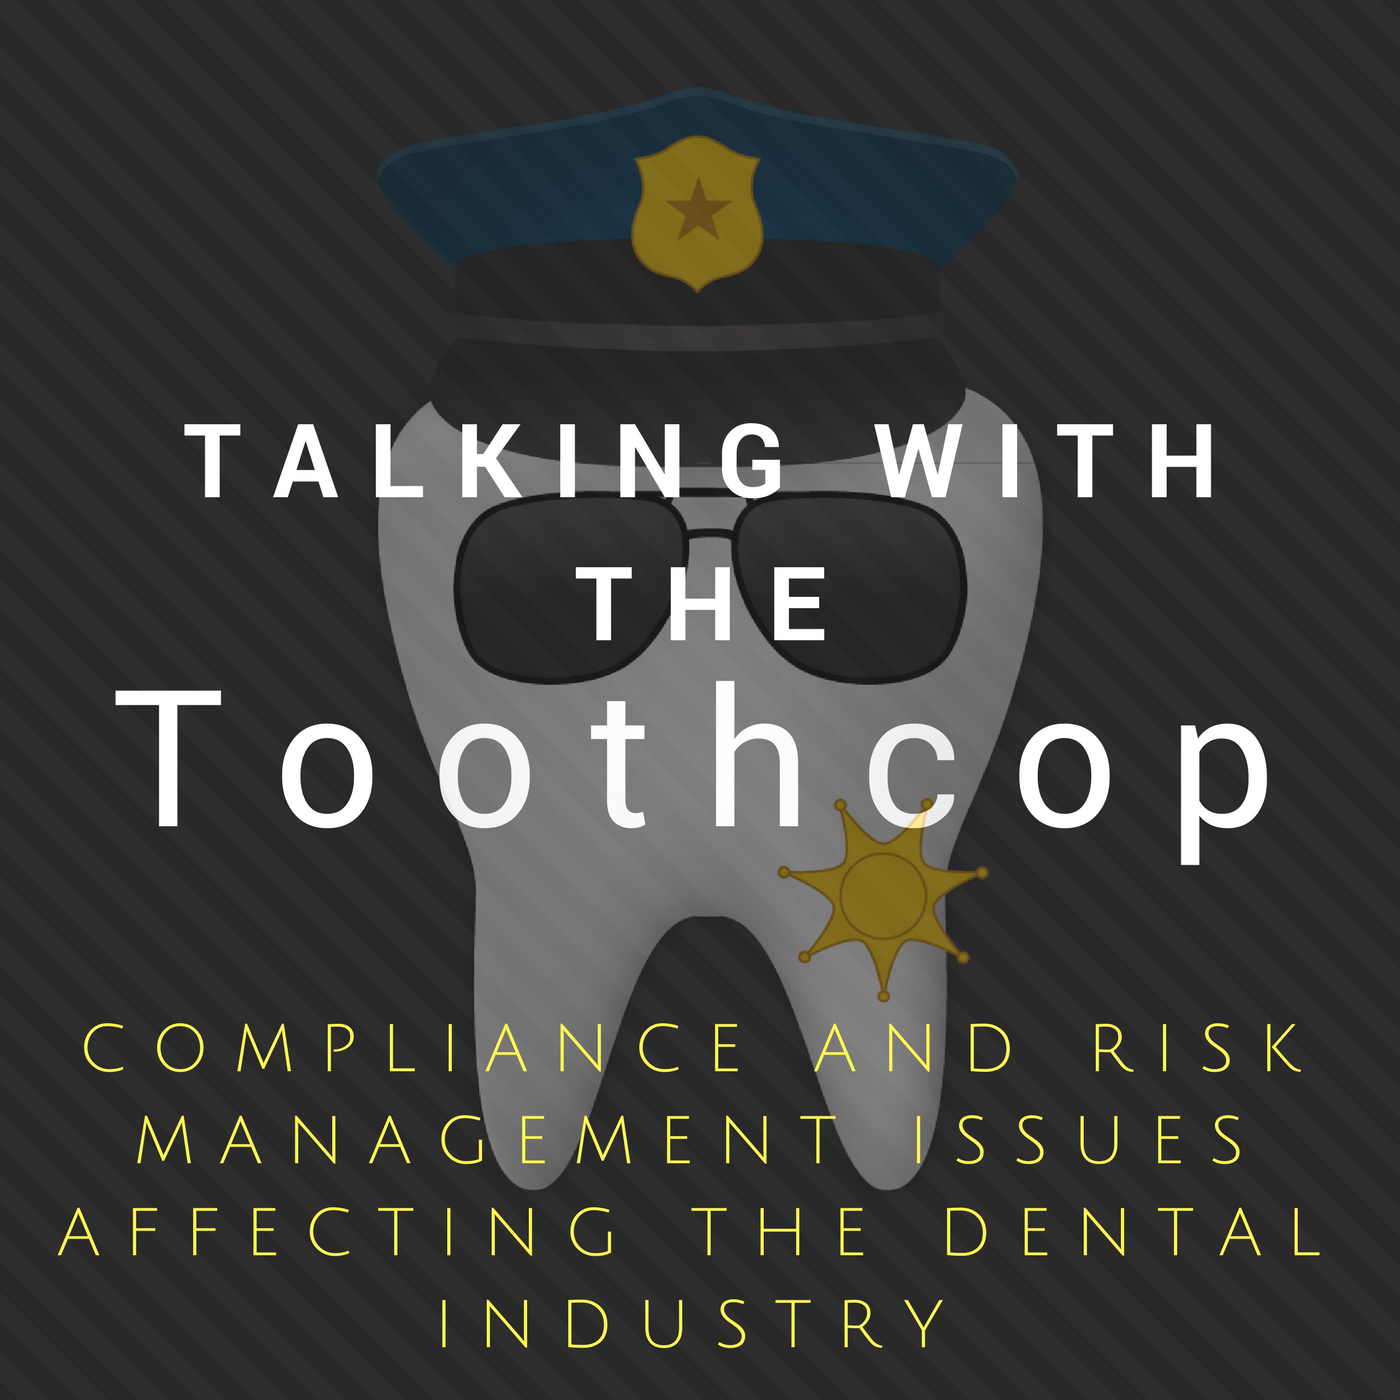 Compliance Coaching for Busy Dental Professionals: This is Talking With The Toothcop